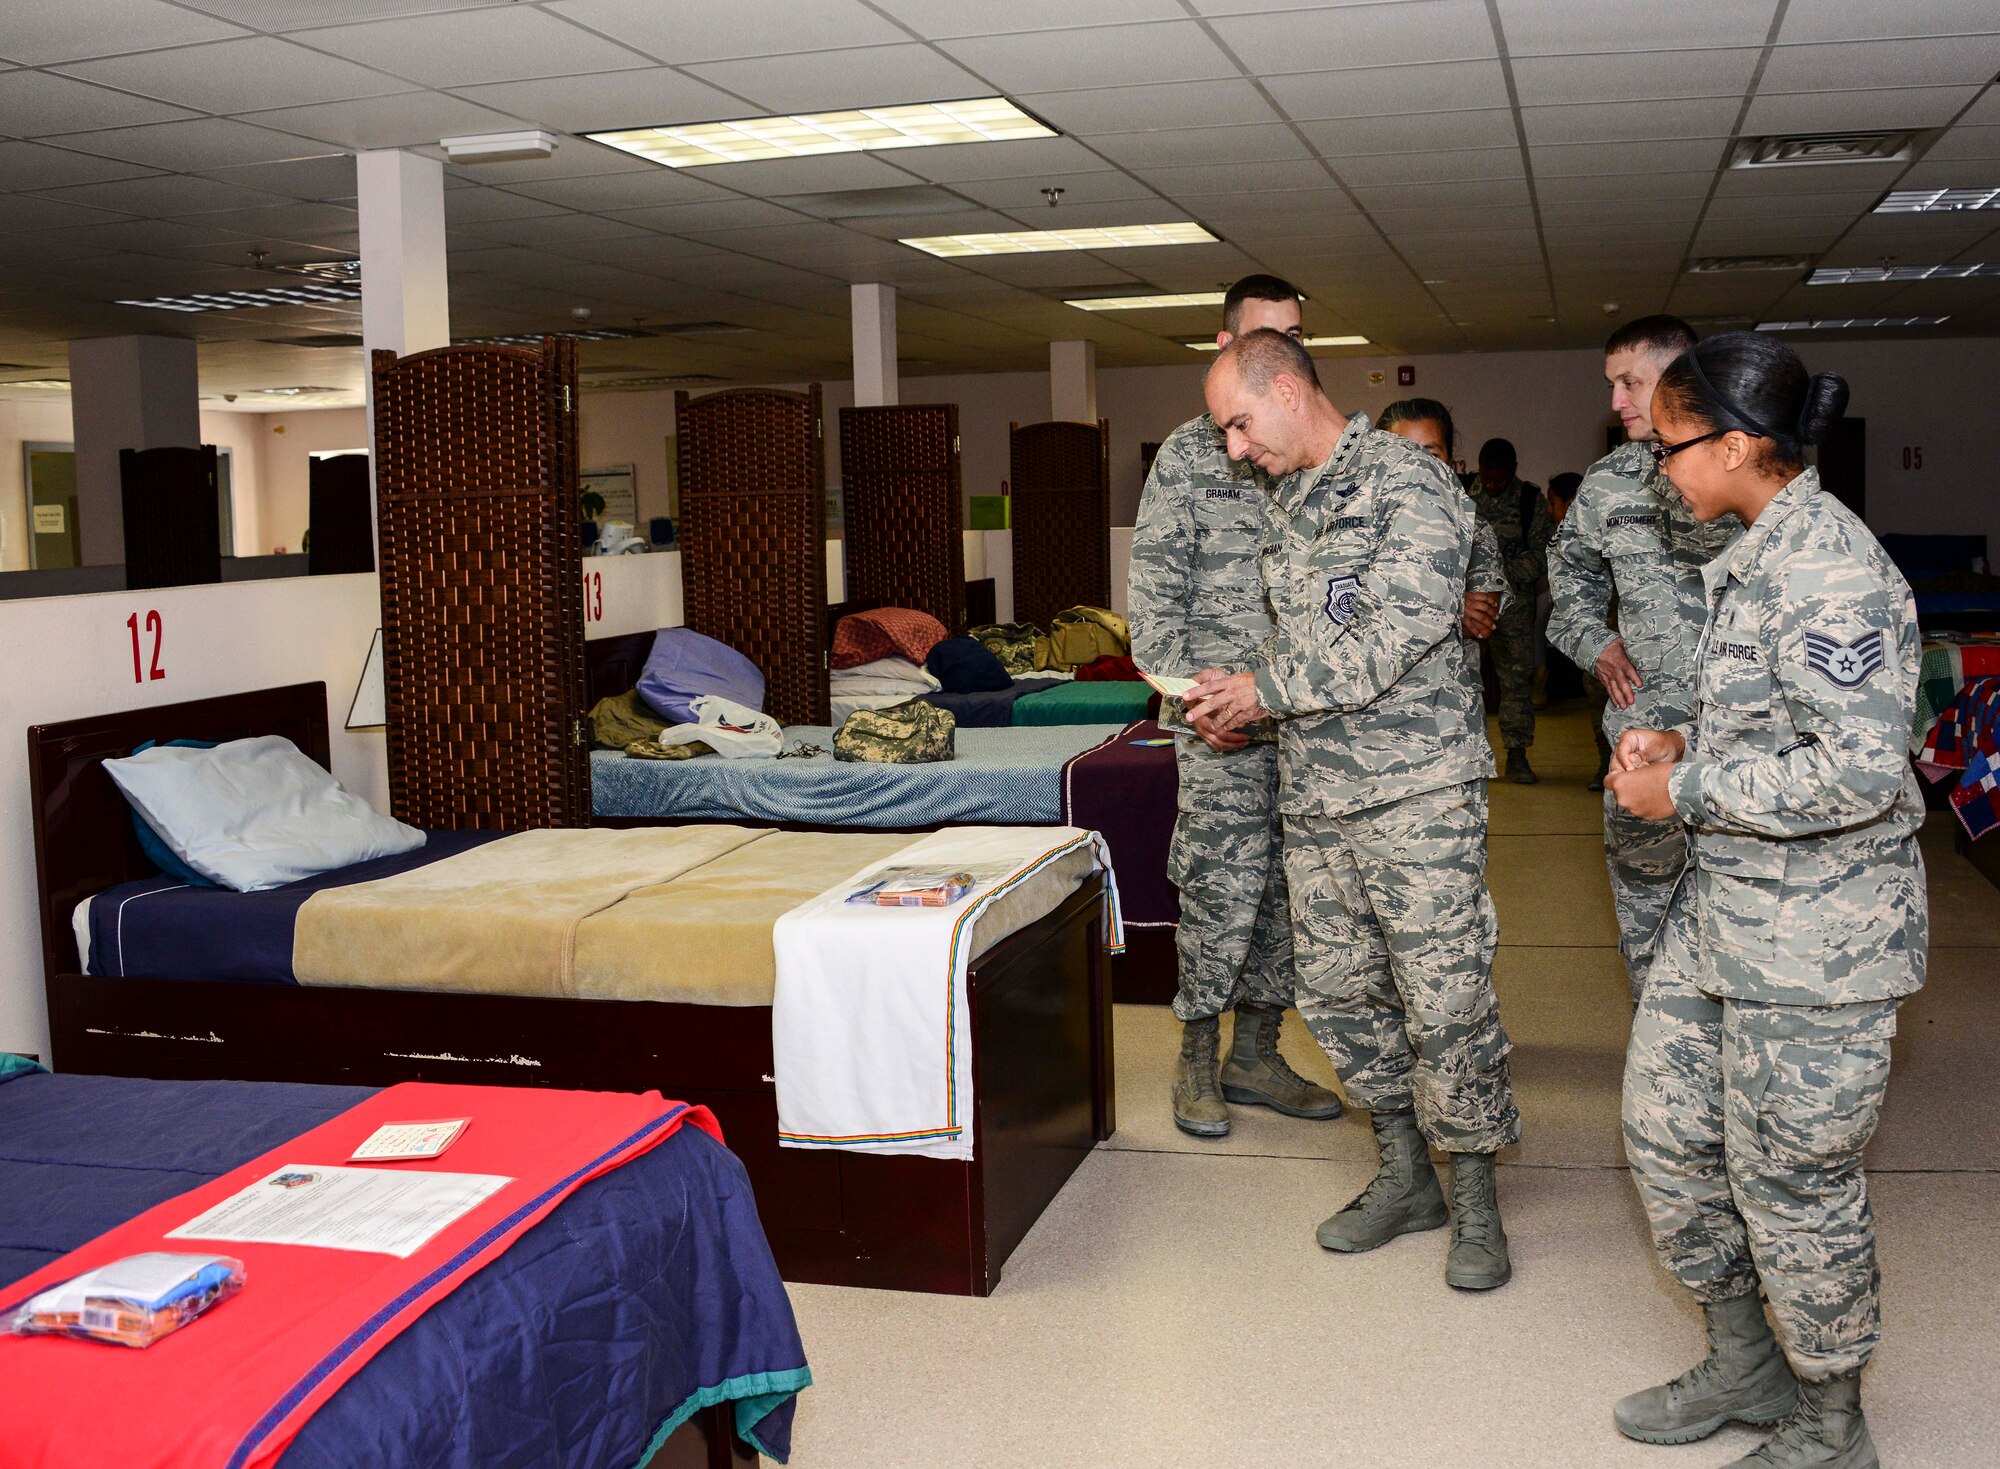 Lt. Gen. Jeffrey L. Harrigian, U.S. Air Forces Central Command commander reads a letter as he tours the Enroute Patient Staging Facility Aug. 11, 2016, at Al Udeid Air Base, Qatar. Harrigian along with Chief Master Sgt. Joseph Montgomery, USAFCENT command chief, visited various facilities to experience what the base offers to accomplish the mission. (U.S. Air Force photo/Senior Airman Janelle Patiño/Released)